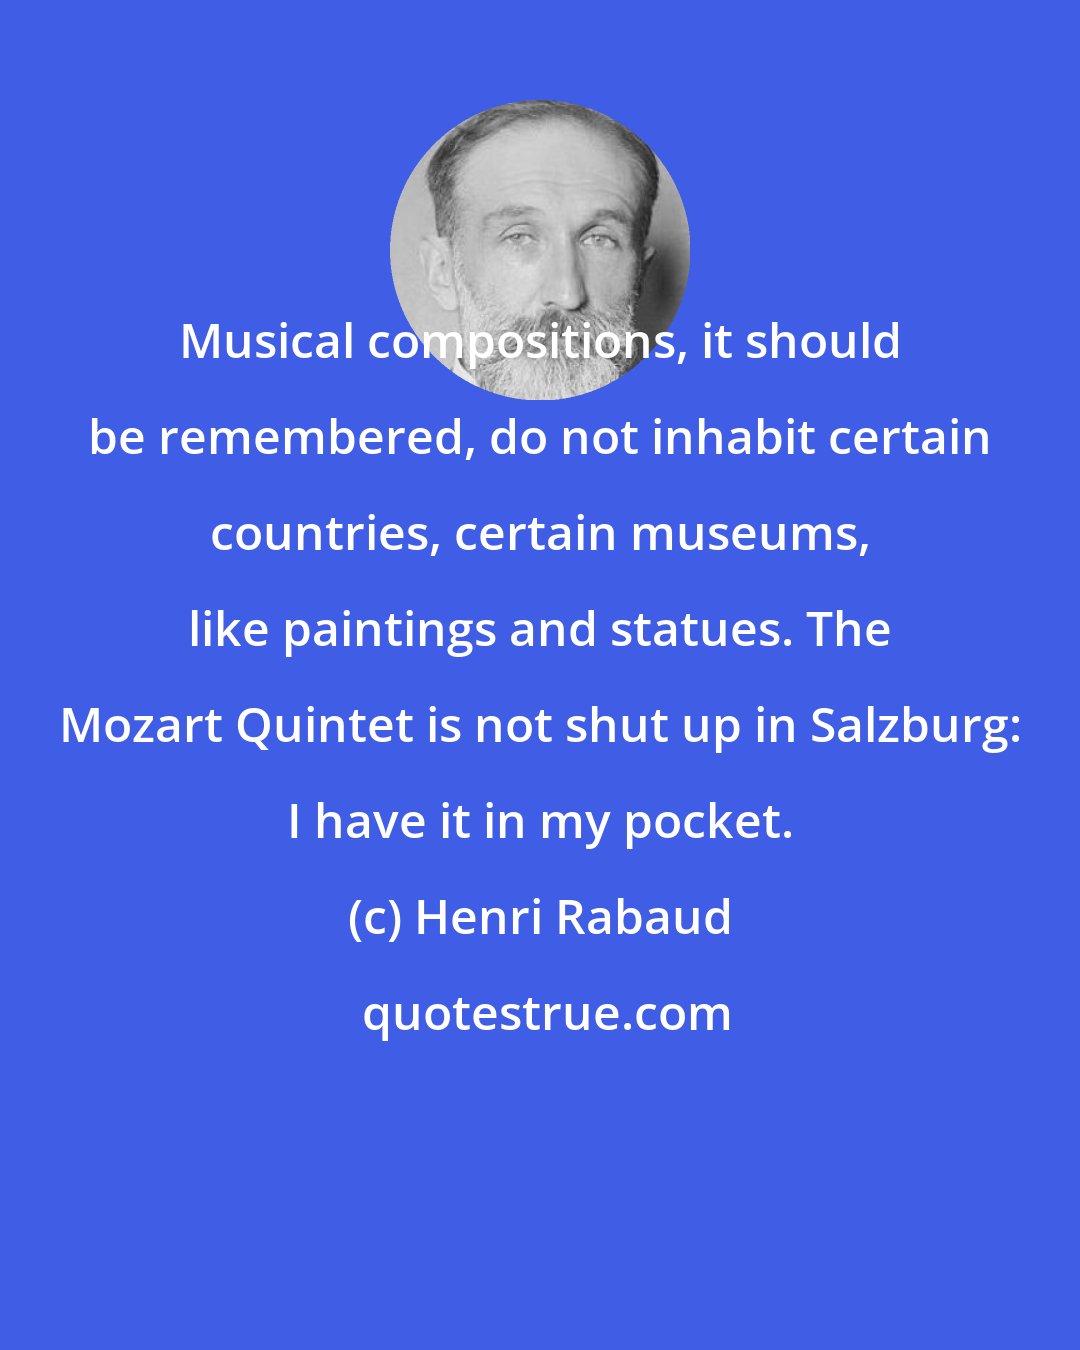 Henri Rabaud: Musical compositions, it should be remembered, do not inhabit certain countries, certain museums, like paintings and statues. The Mozart Quintet is not shut up in Salzburg: I have it in my pocket.